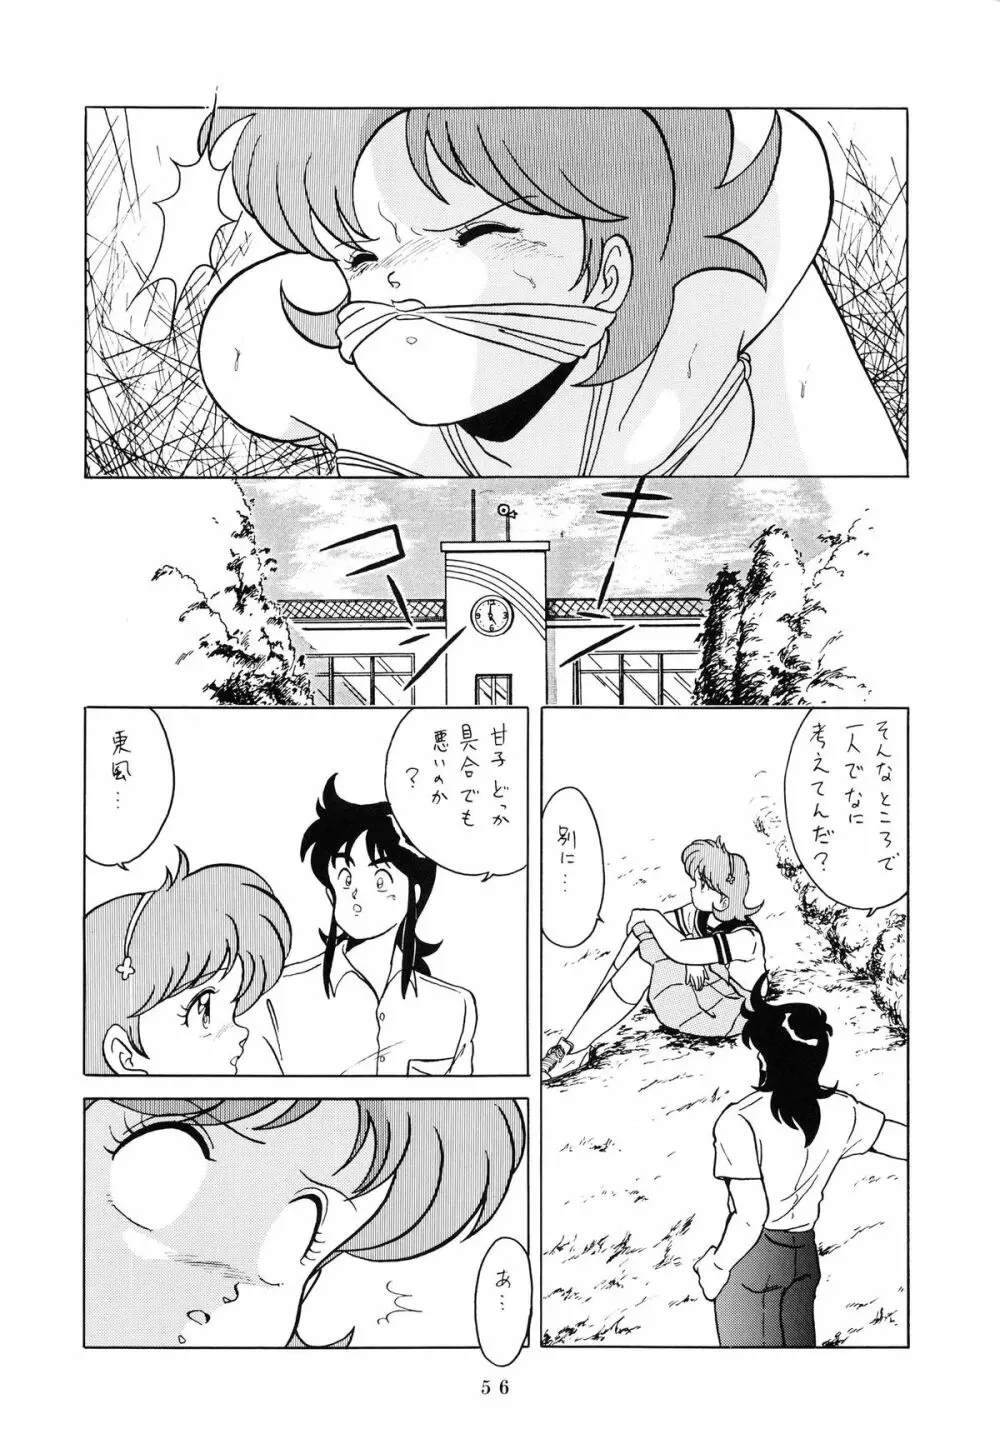 RAINBOW CHASER TENT HOUSE Vol.XI Page.56